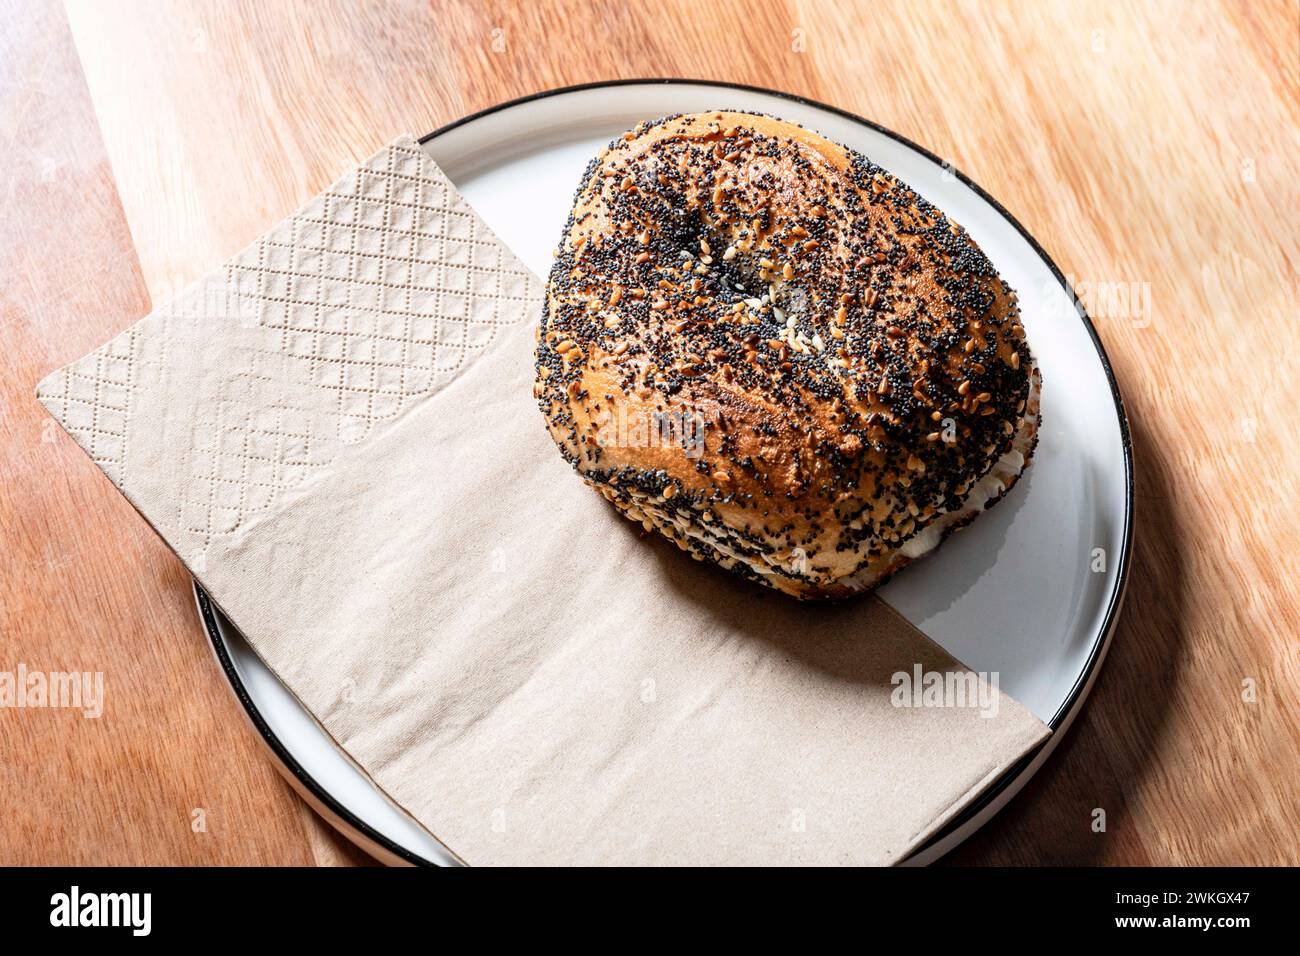 Sesame bagel sandwich on a plate, ready to be served in a cafe. Stock Photo